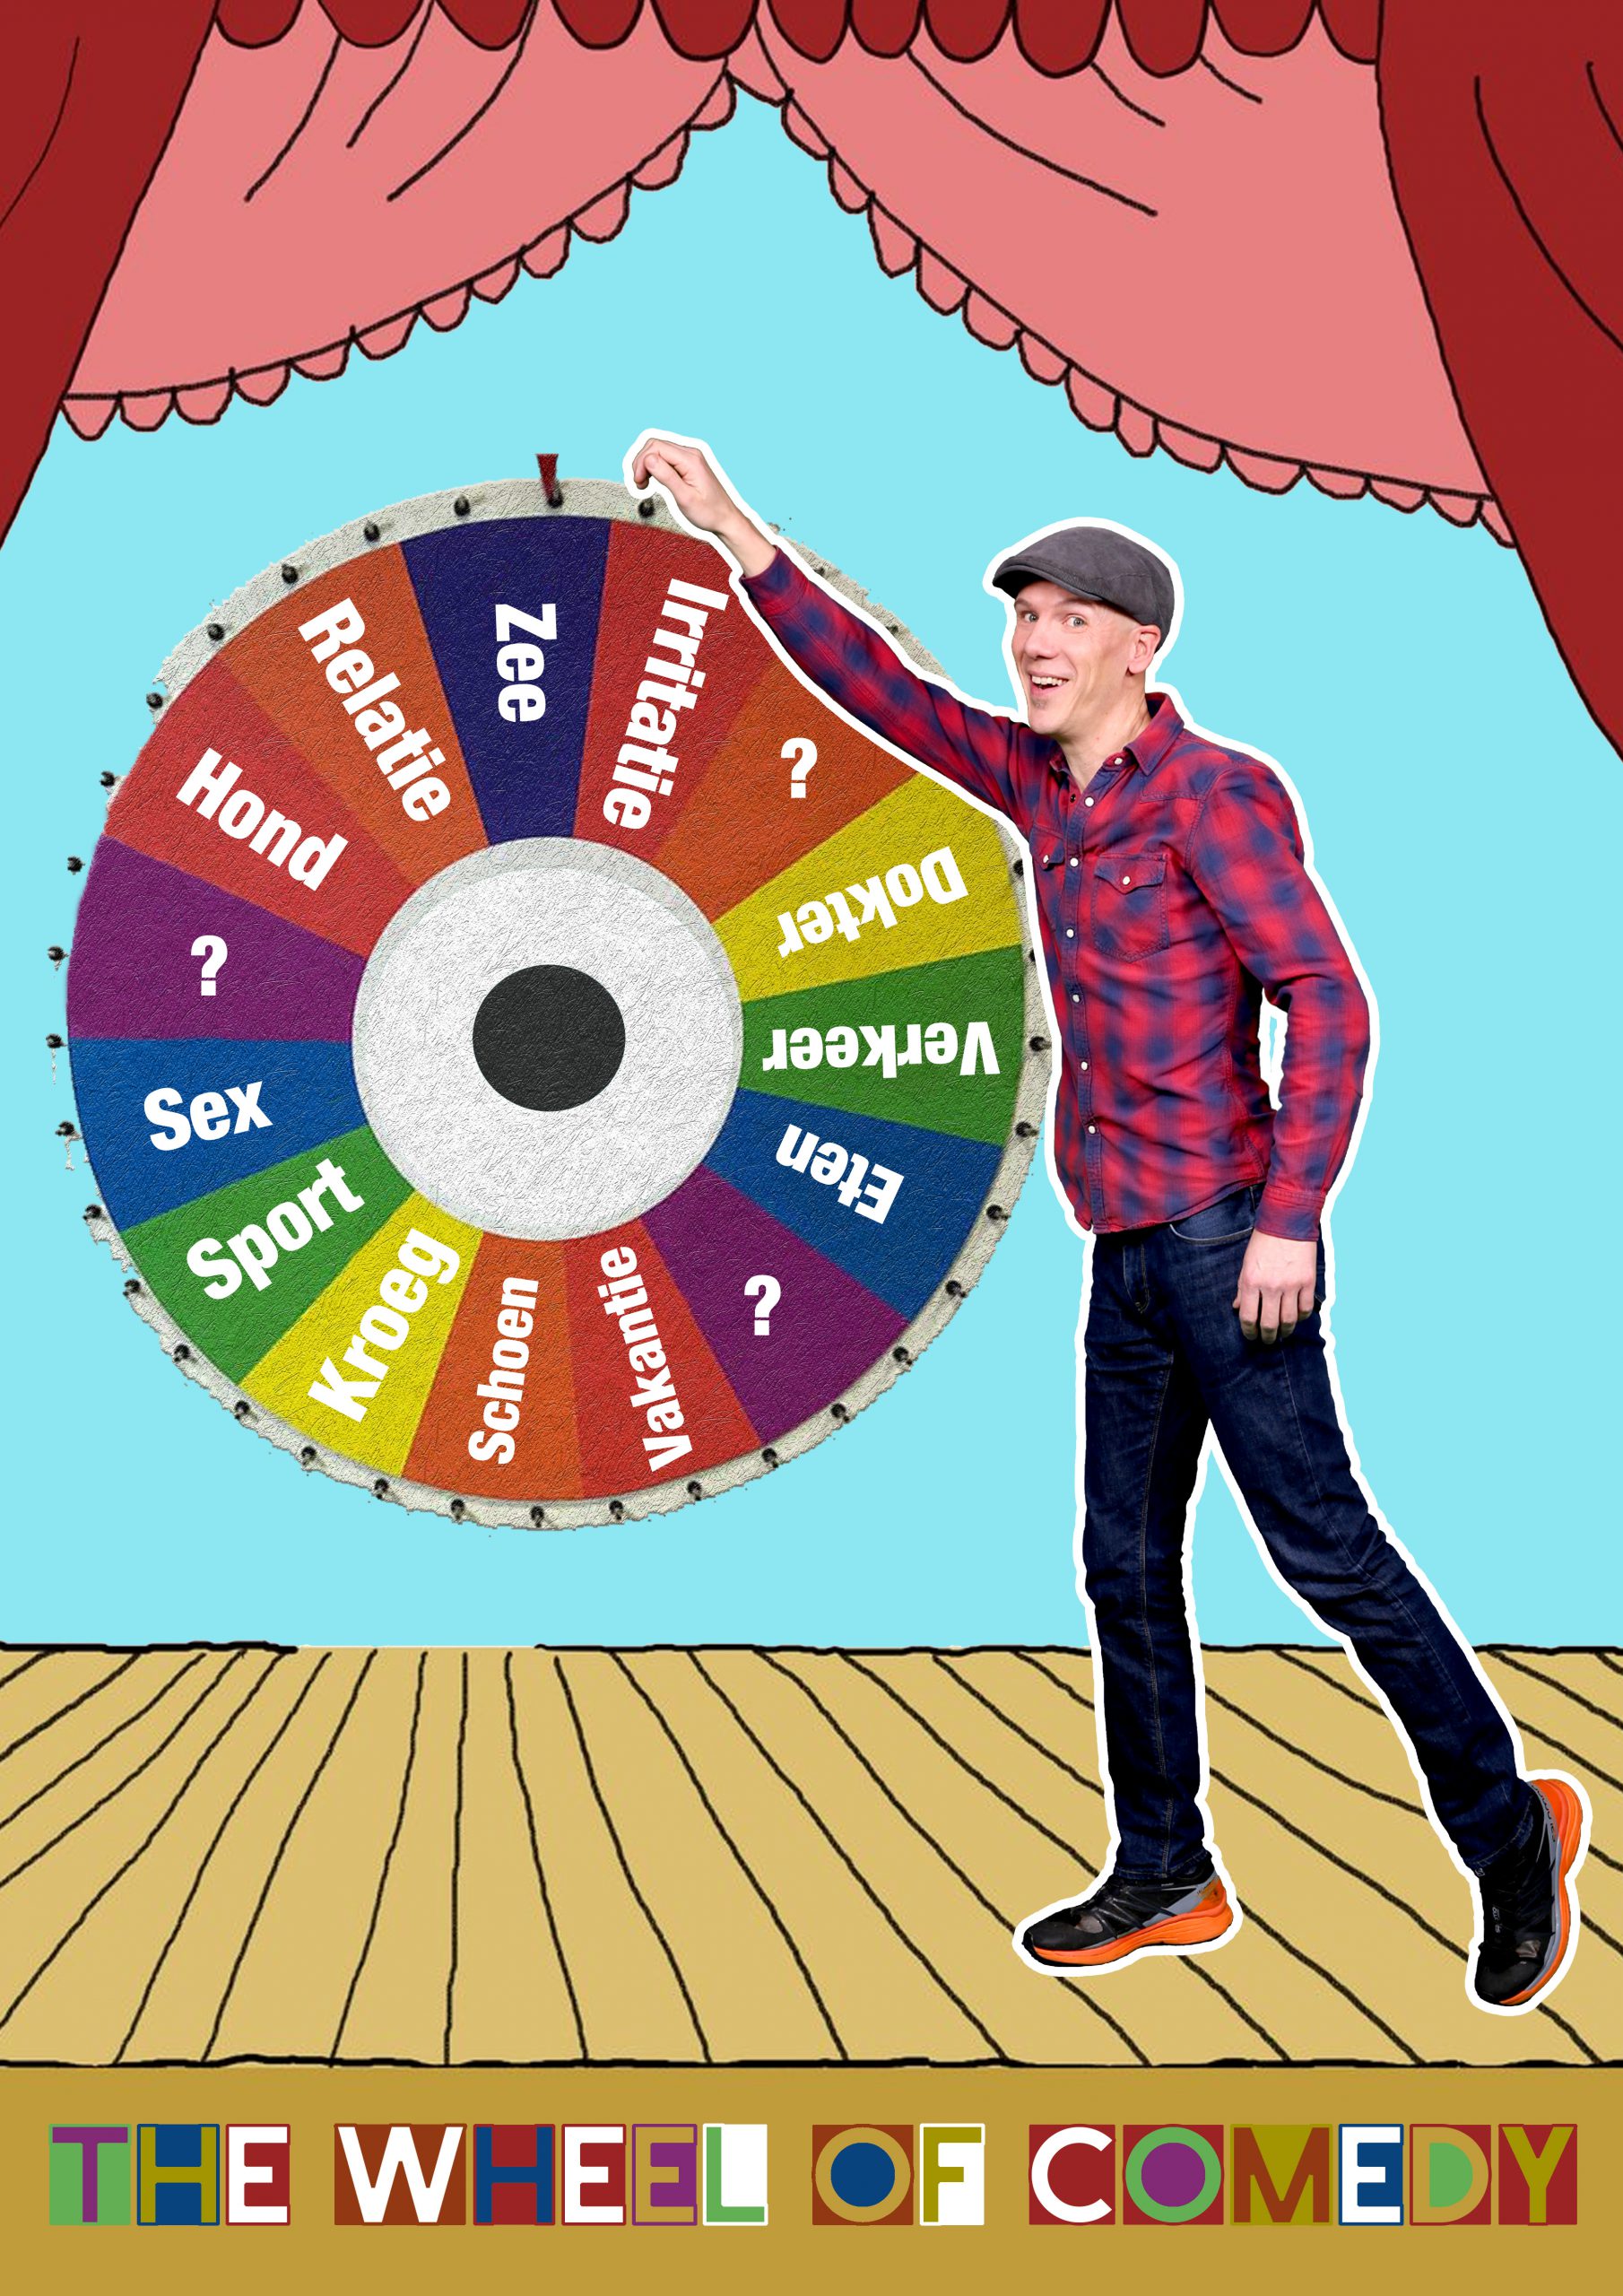 The Wheel of Comedy (tryout)